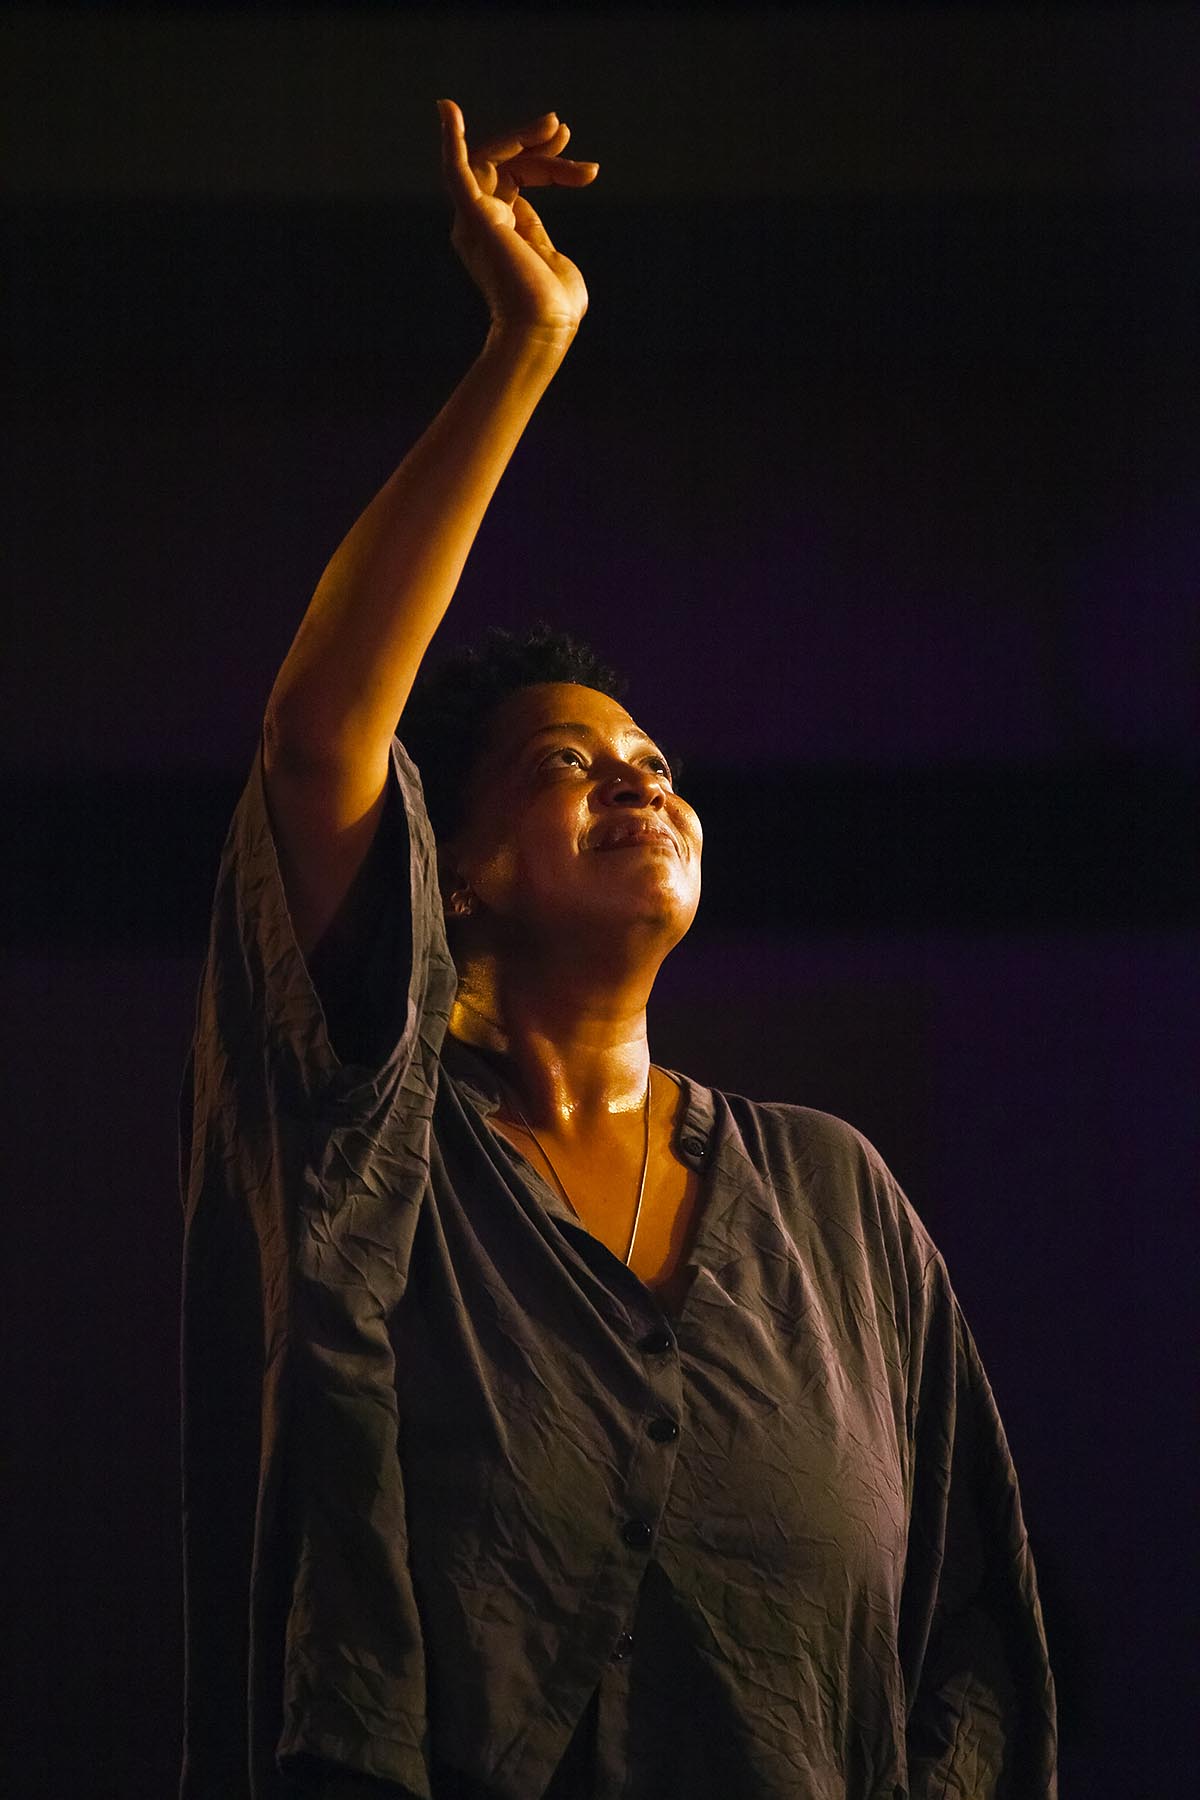 LISA FISCHER sings with GRAND BATON in the Night Club at the MONTERY JAZZ FESTIVA